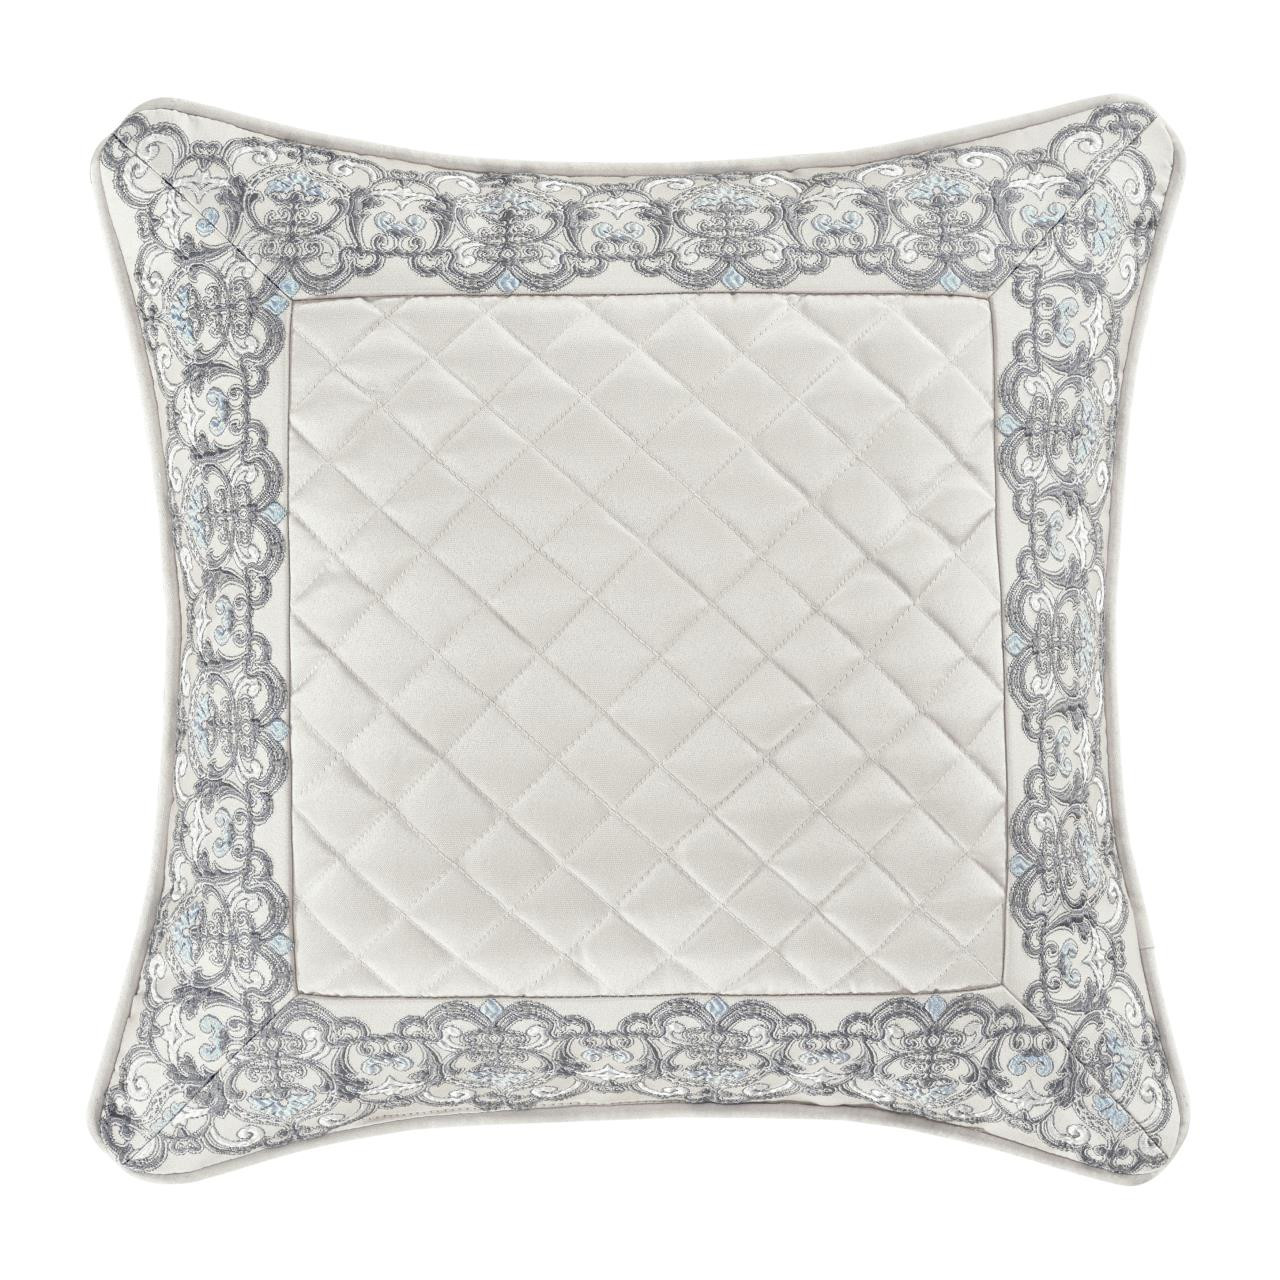 Adagio Sterling 18" Square Embellished Pillow - 193842125045